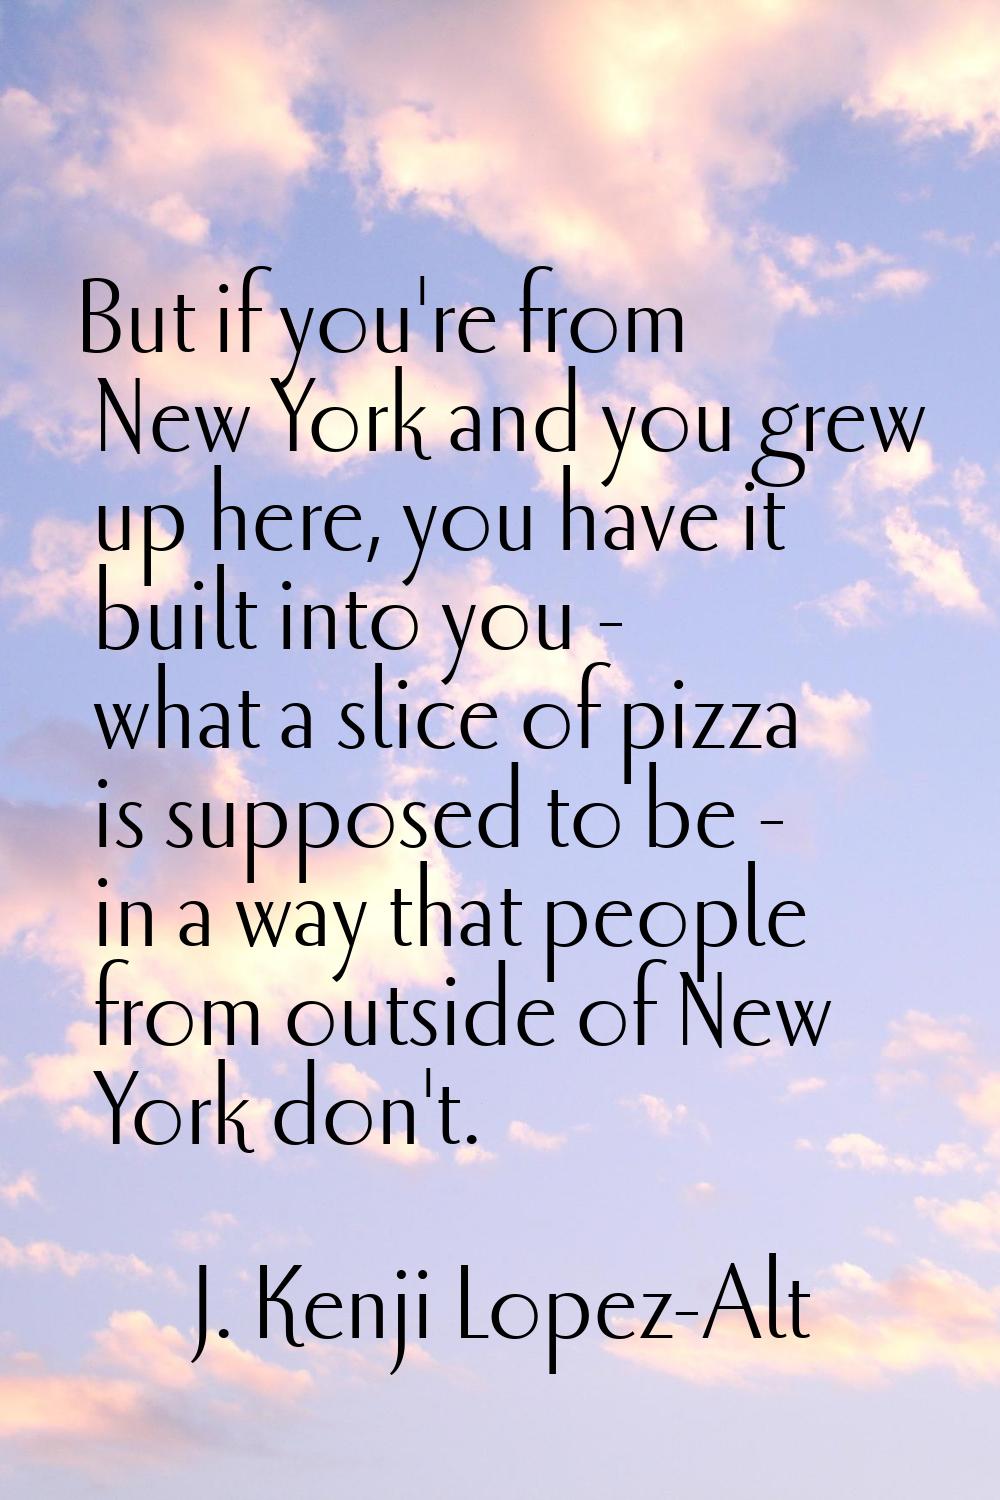 But if you're from New York and you grew up here, you have it built into you - what a slice of pizz